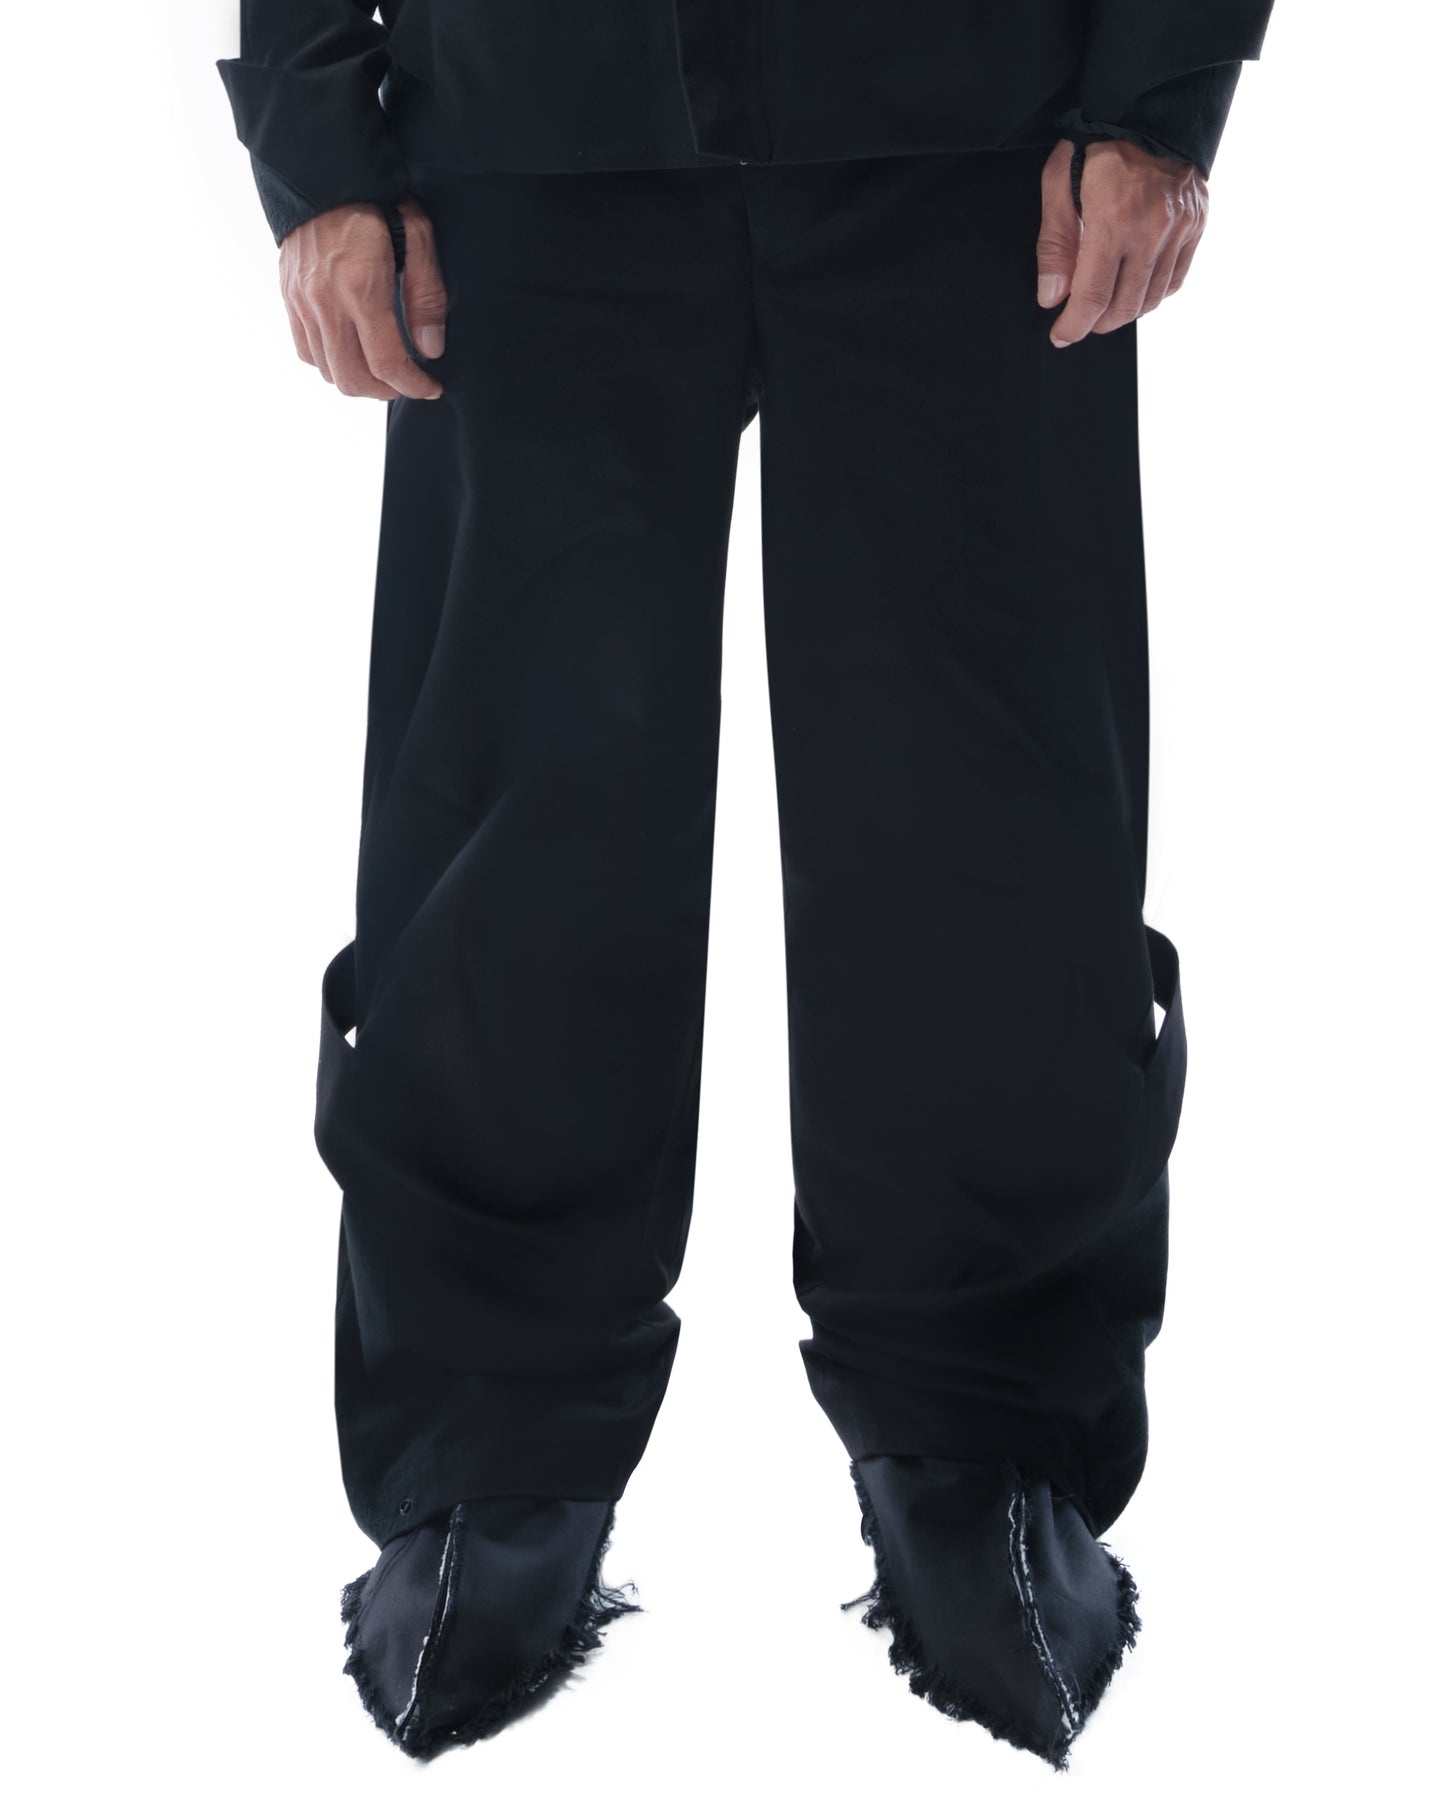 ASKEW TAILORED BLACK TROUSERS